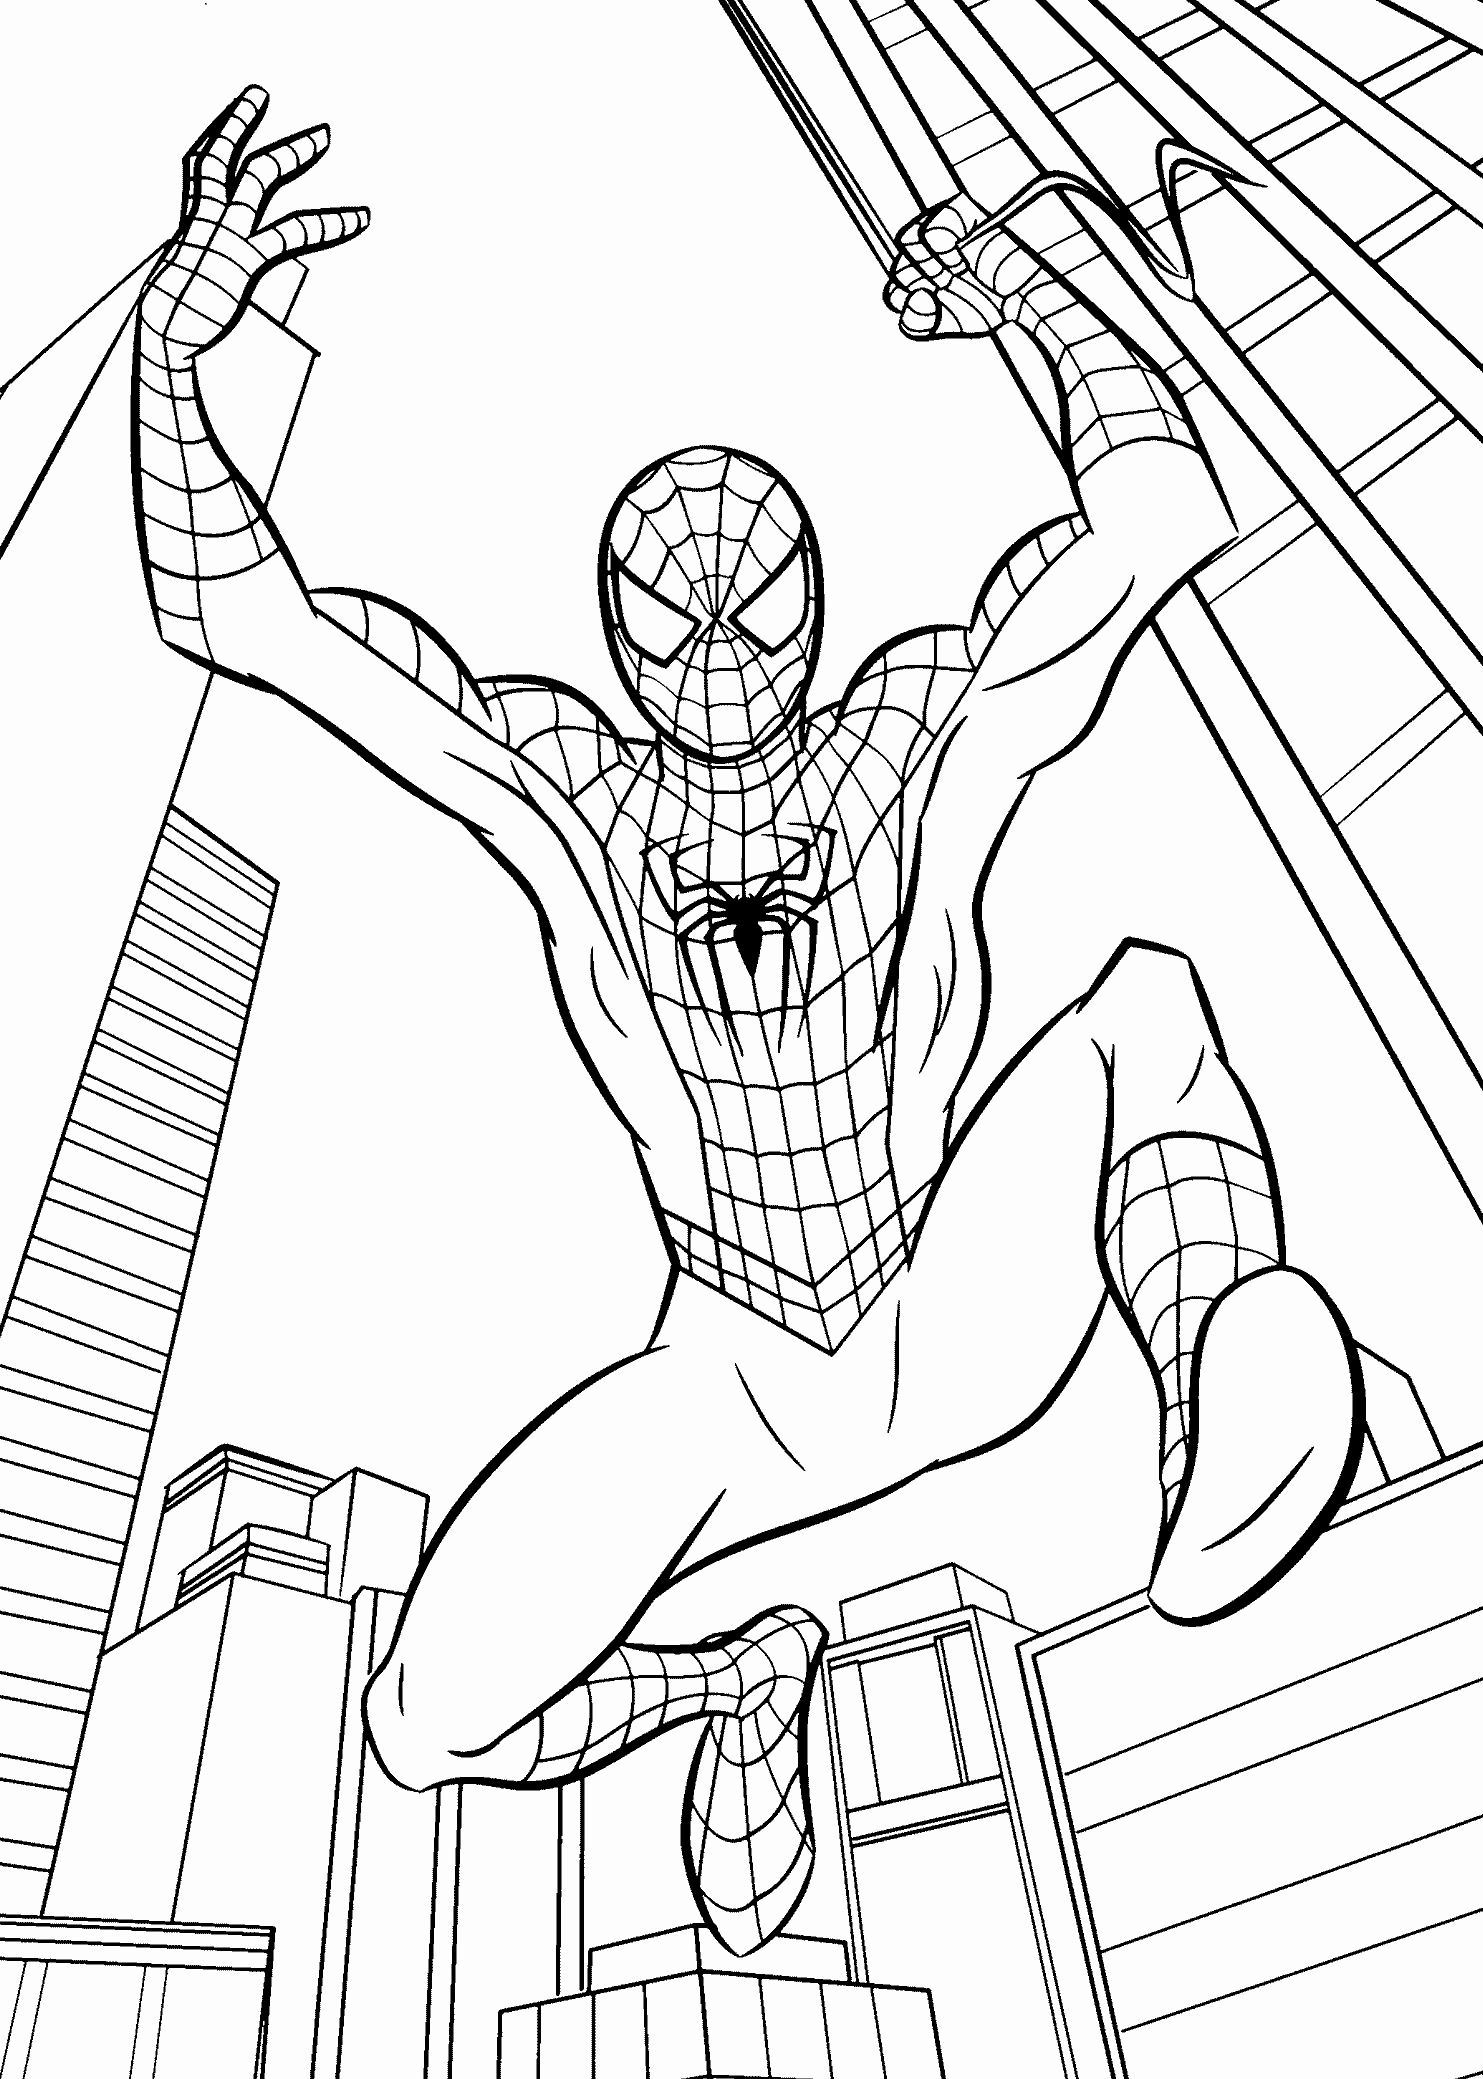 November Color Pages Free Printable Spiderman Coloring Pages Unique Drawn Spider Man